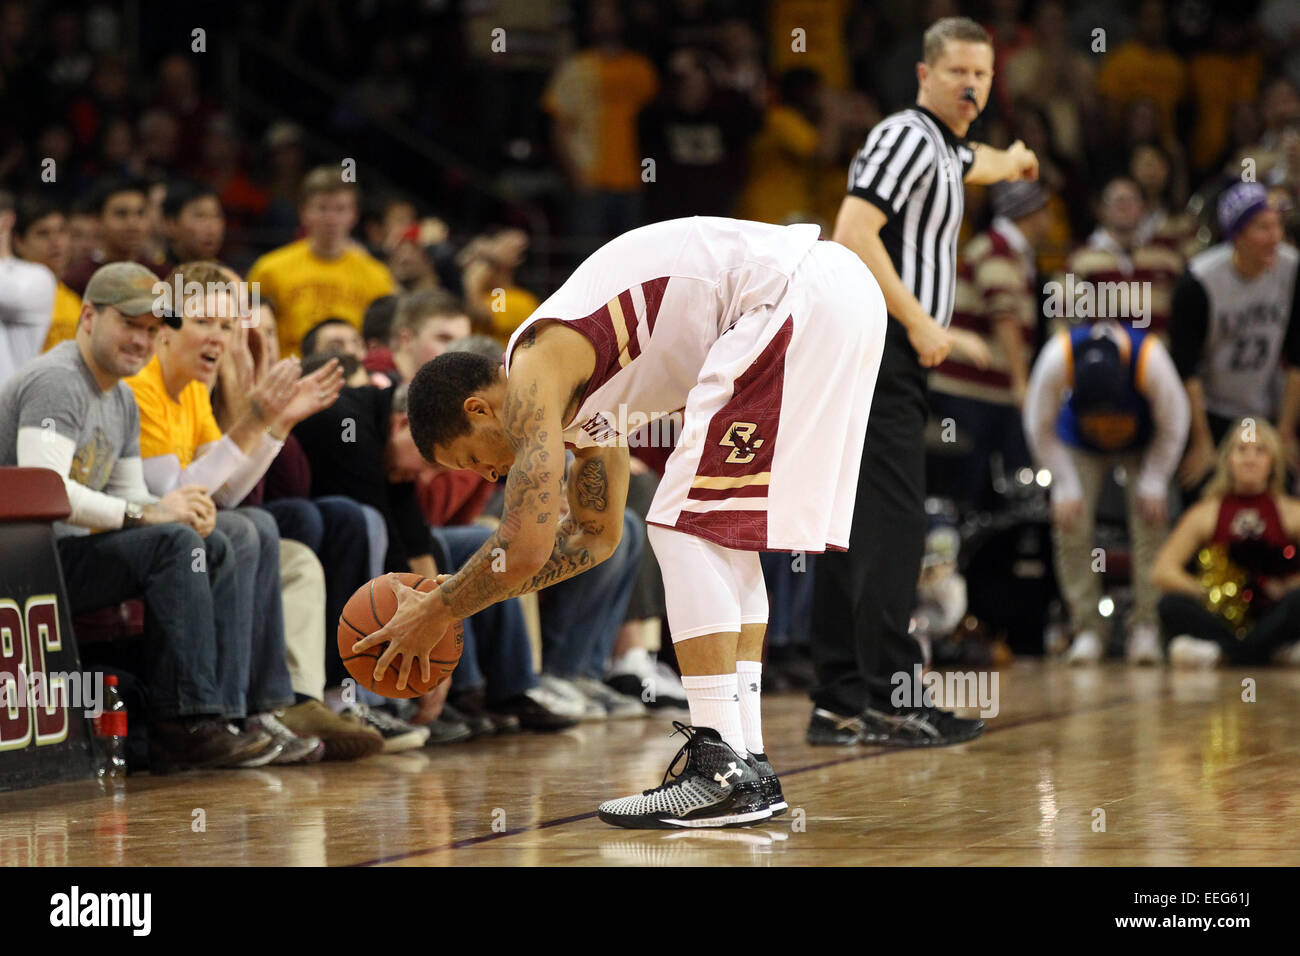 Massachusetts, USA. 17th Jan 2015.  Boston College Eagles guard Dimitri Batten (1) react after stepping out of bounds during the second half of an NCAA basketball game between the Virginia Cavaliers and Boston College Eagles at Conte Forum in Chestnut Hill, Massachusetts. Virginia defeated Boston College 66-51.  Credit:  Cal Sport Media/Alamy Live News Stock Photo